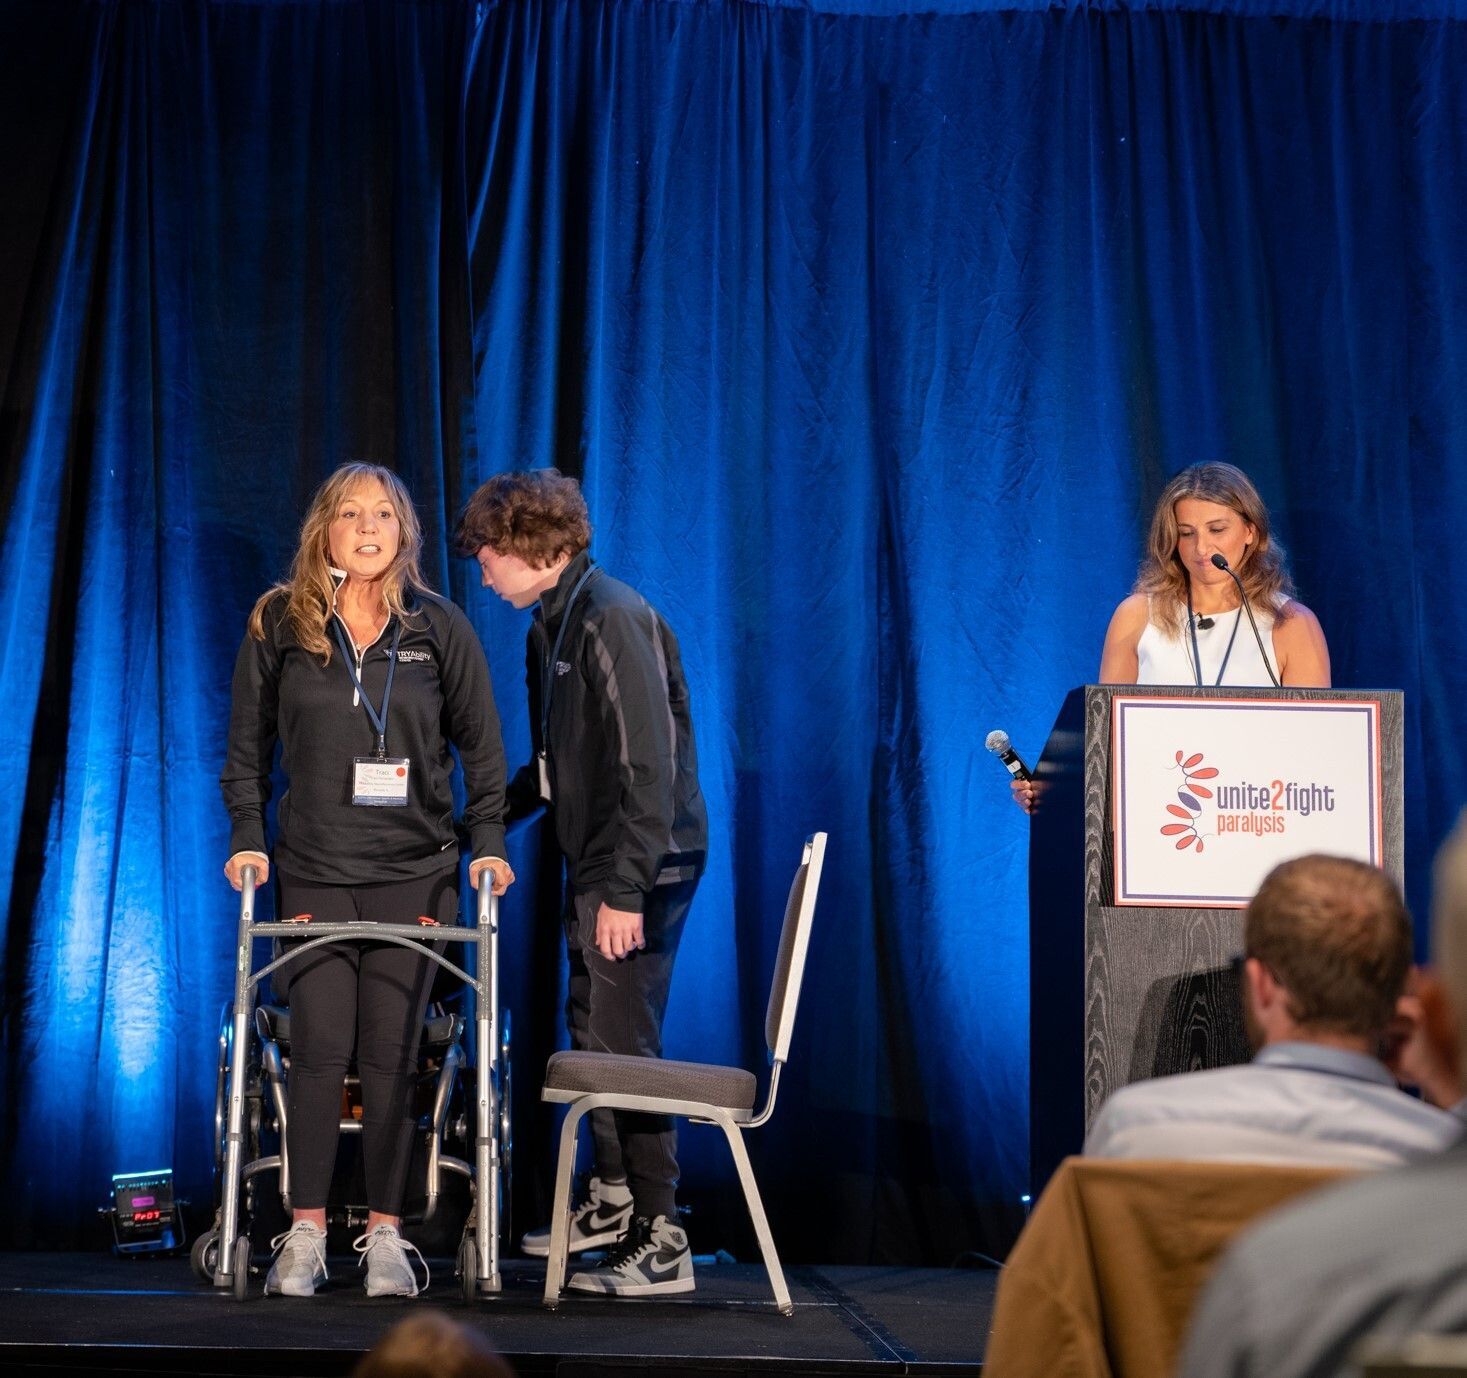 White woman stands with a walker next to a younger white man getting up from a chair while a white woman looks on from behind a lectern